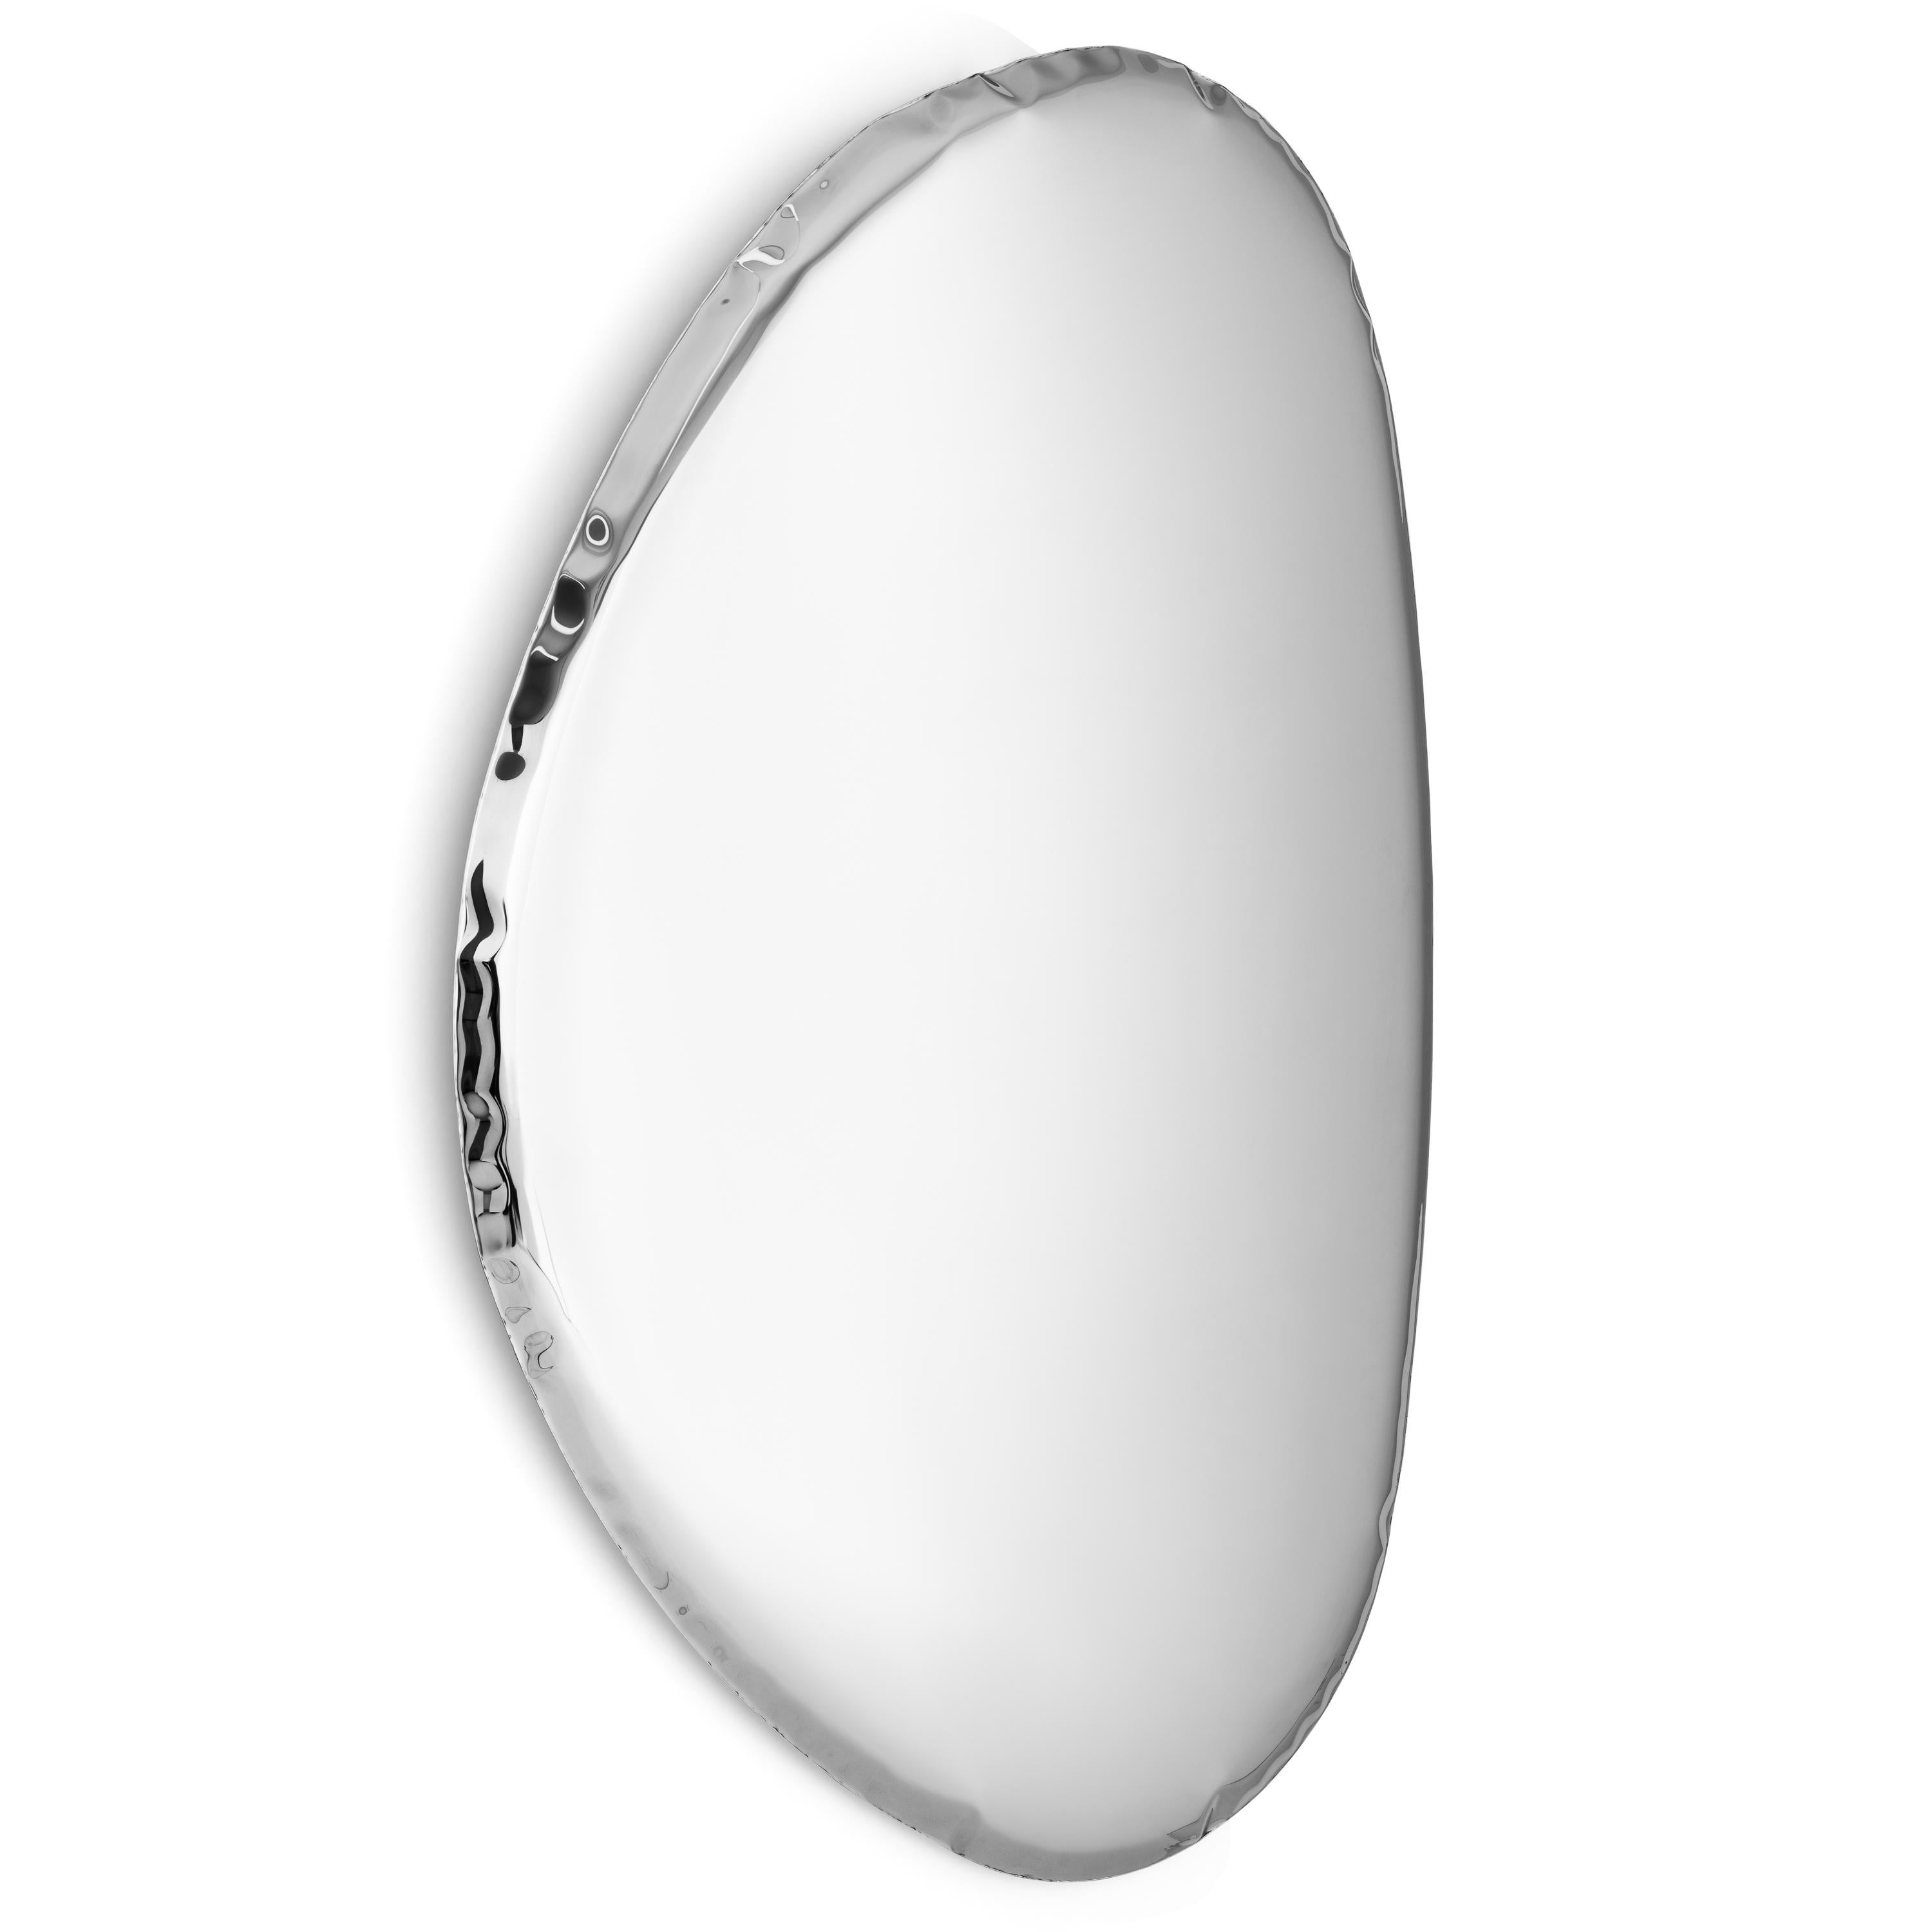 Stainless steel tafla O2 wall mirror by Zieta
Dimensions: D 6 x W 97 x H 150 cm 
Material: Stainless steel.
Finish: Polished. 
Available finishes: Stainless steel, white matt, Sapphire/Emerald, Sapphire, Emerald, deep space blue, dark matter, or red